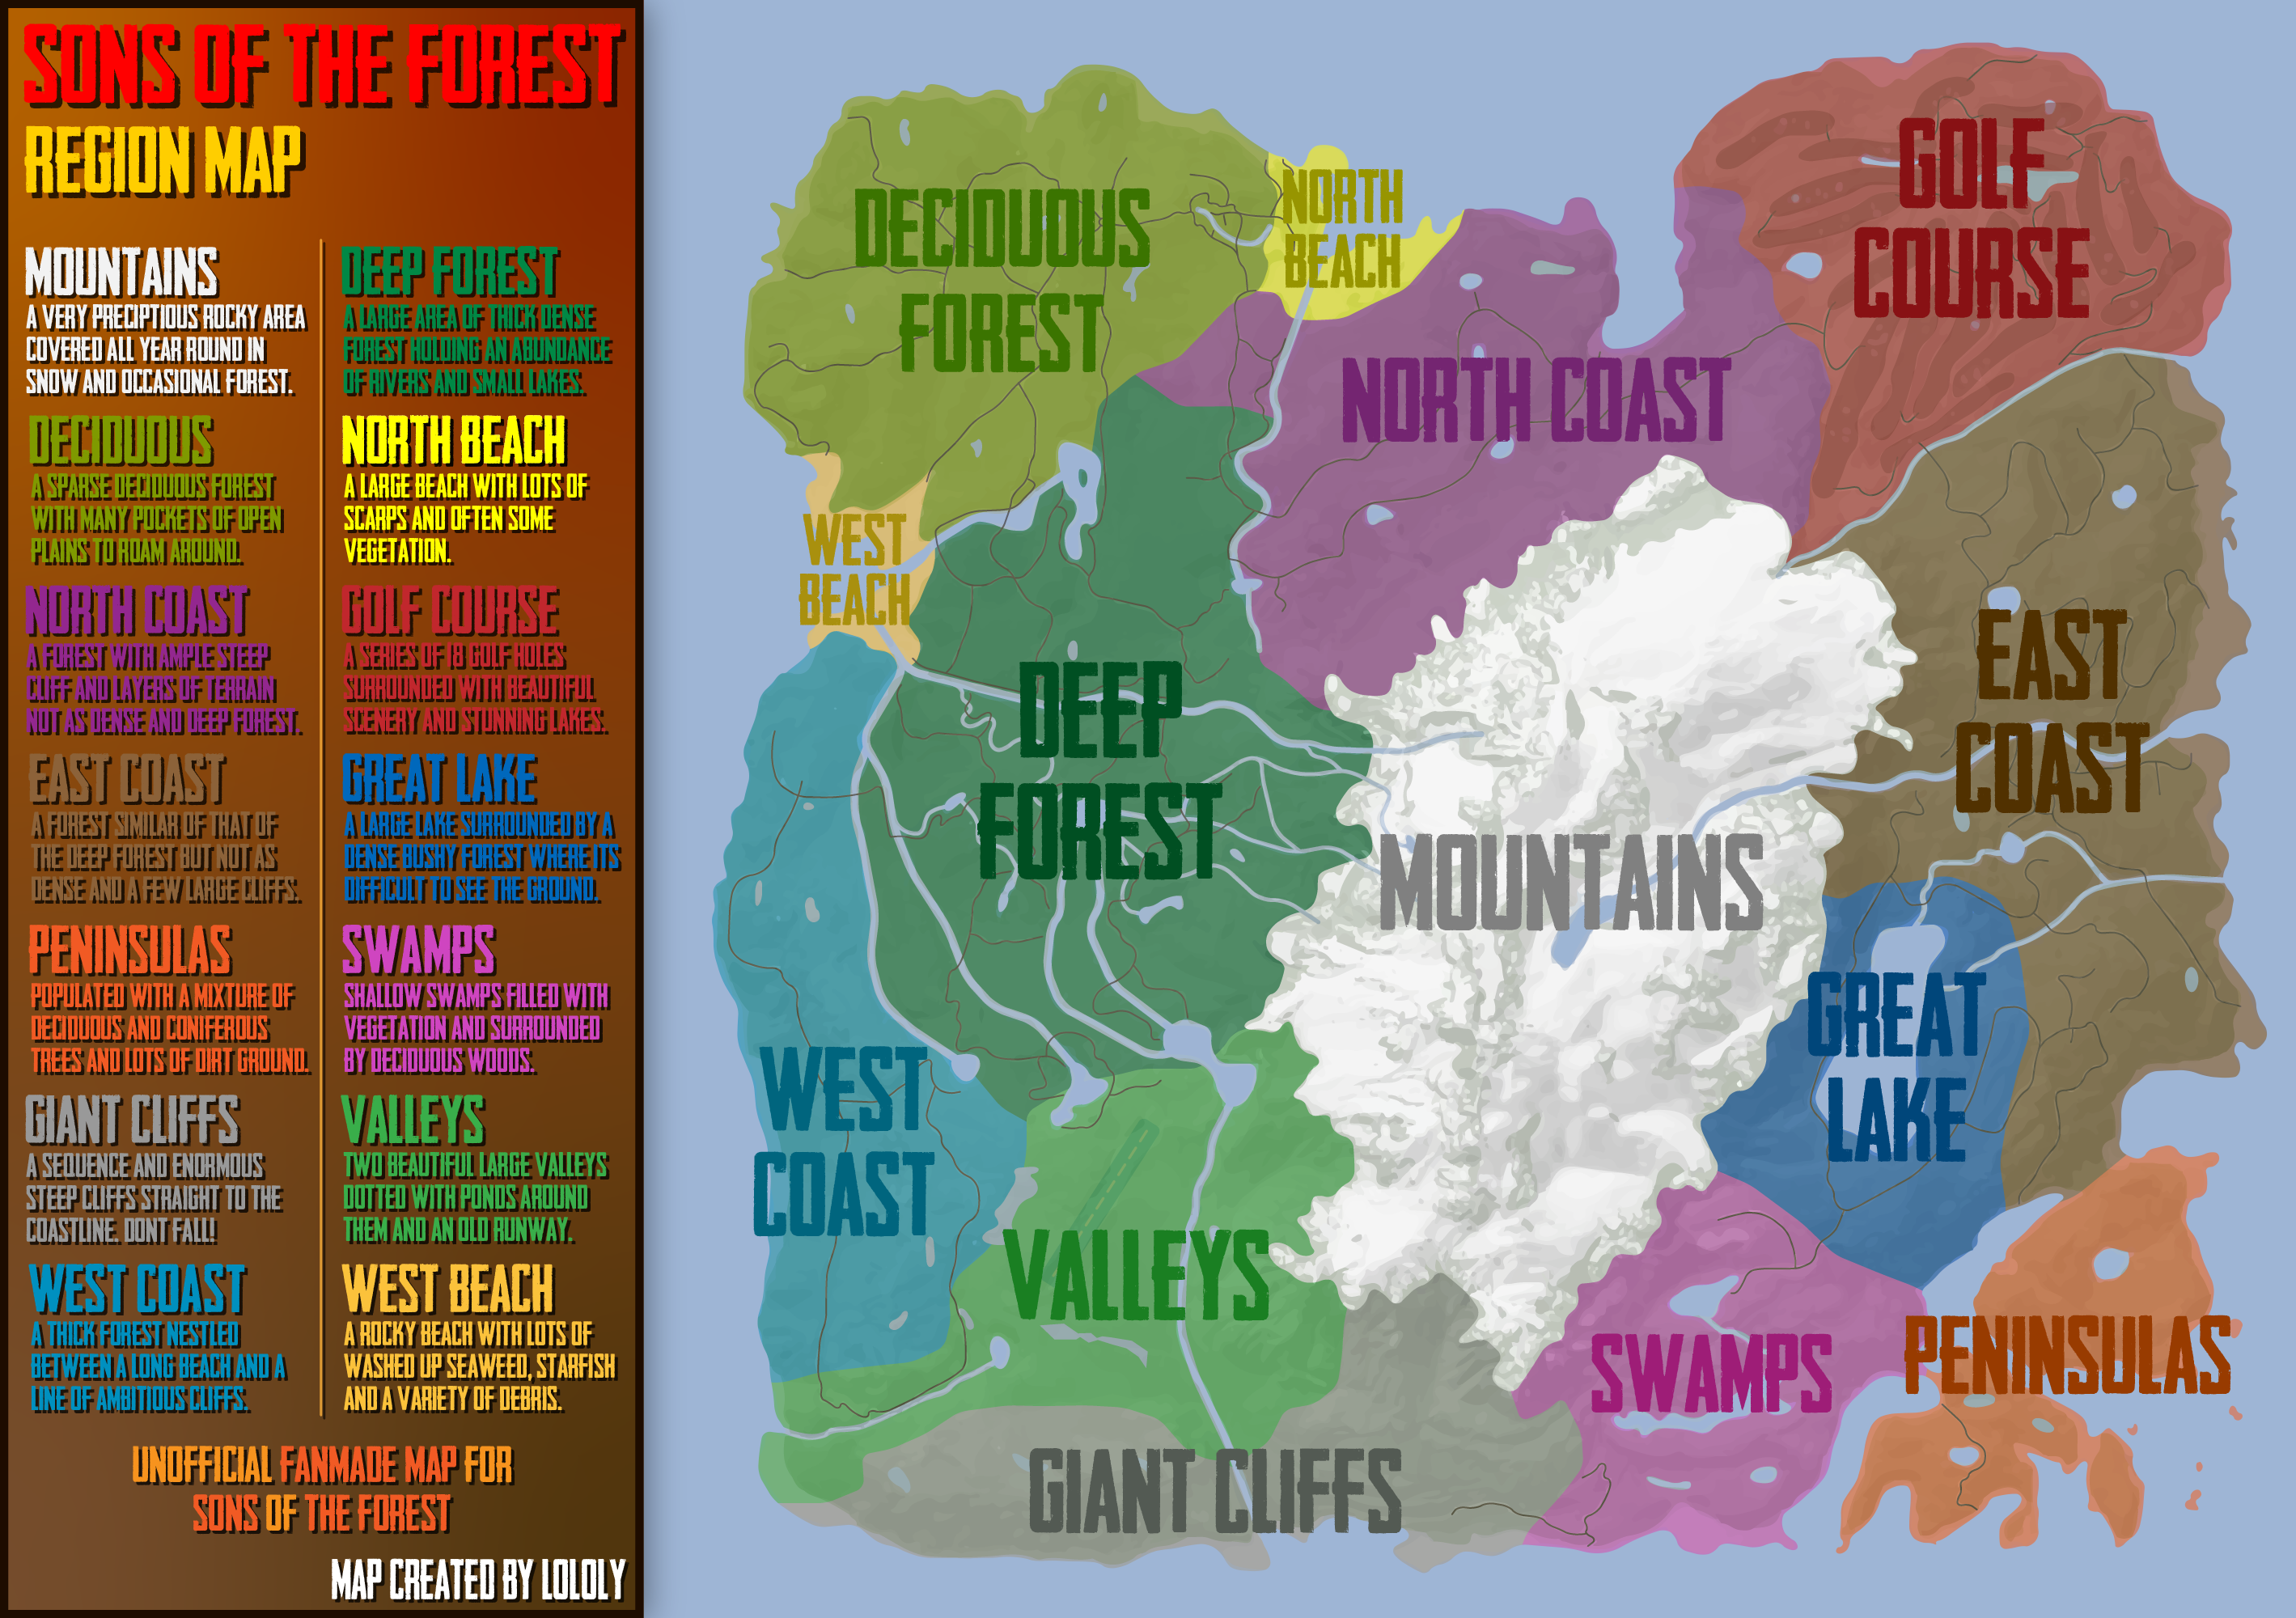 Sons of the Forest - Interactive Maps